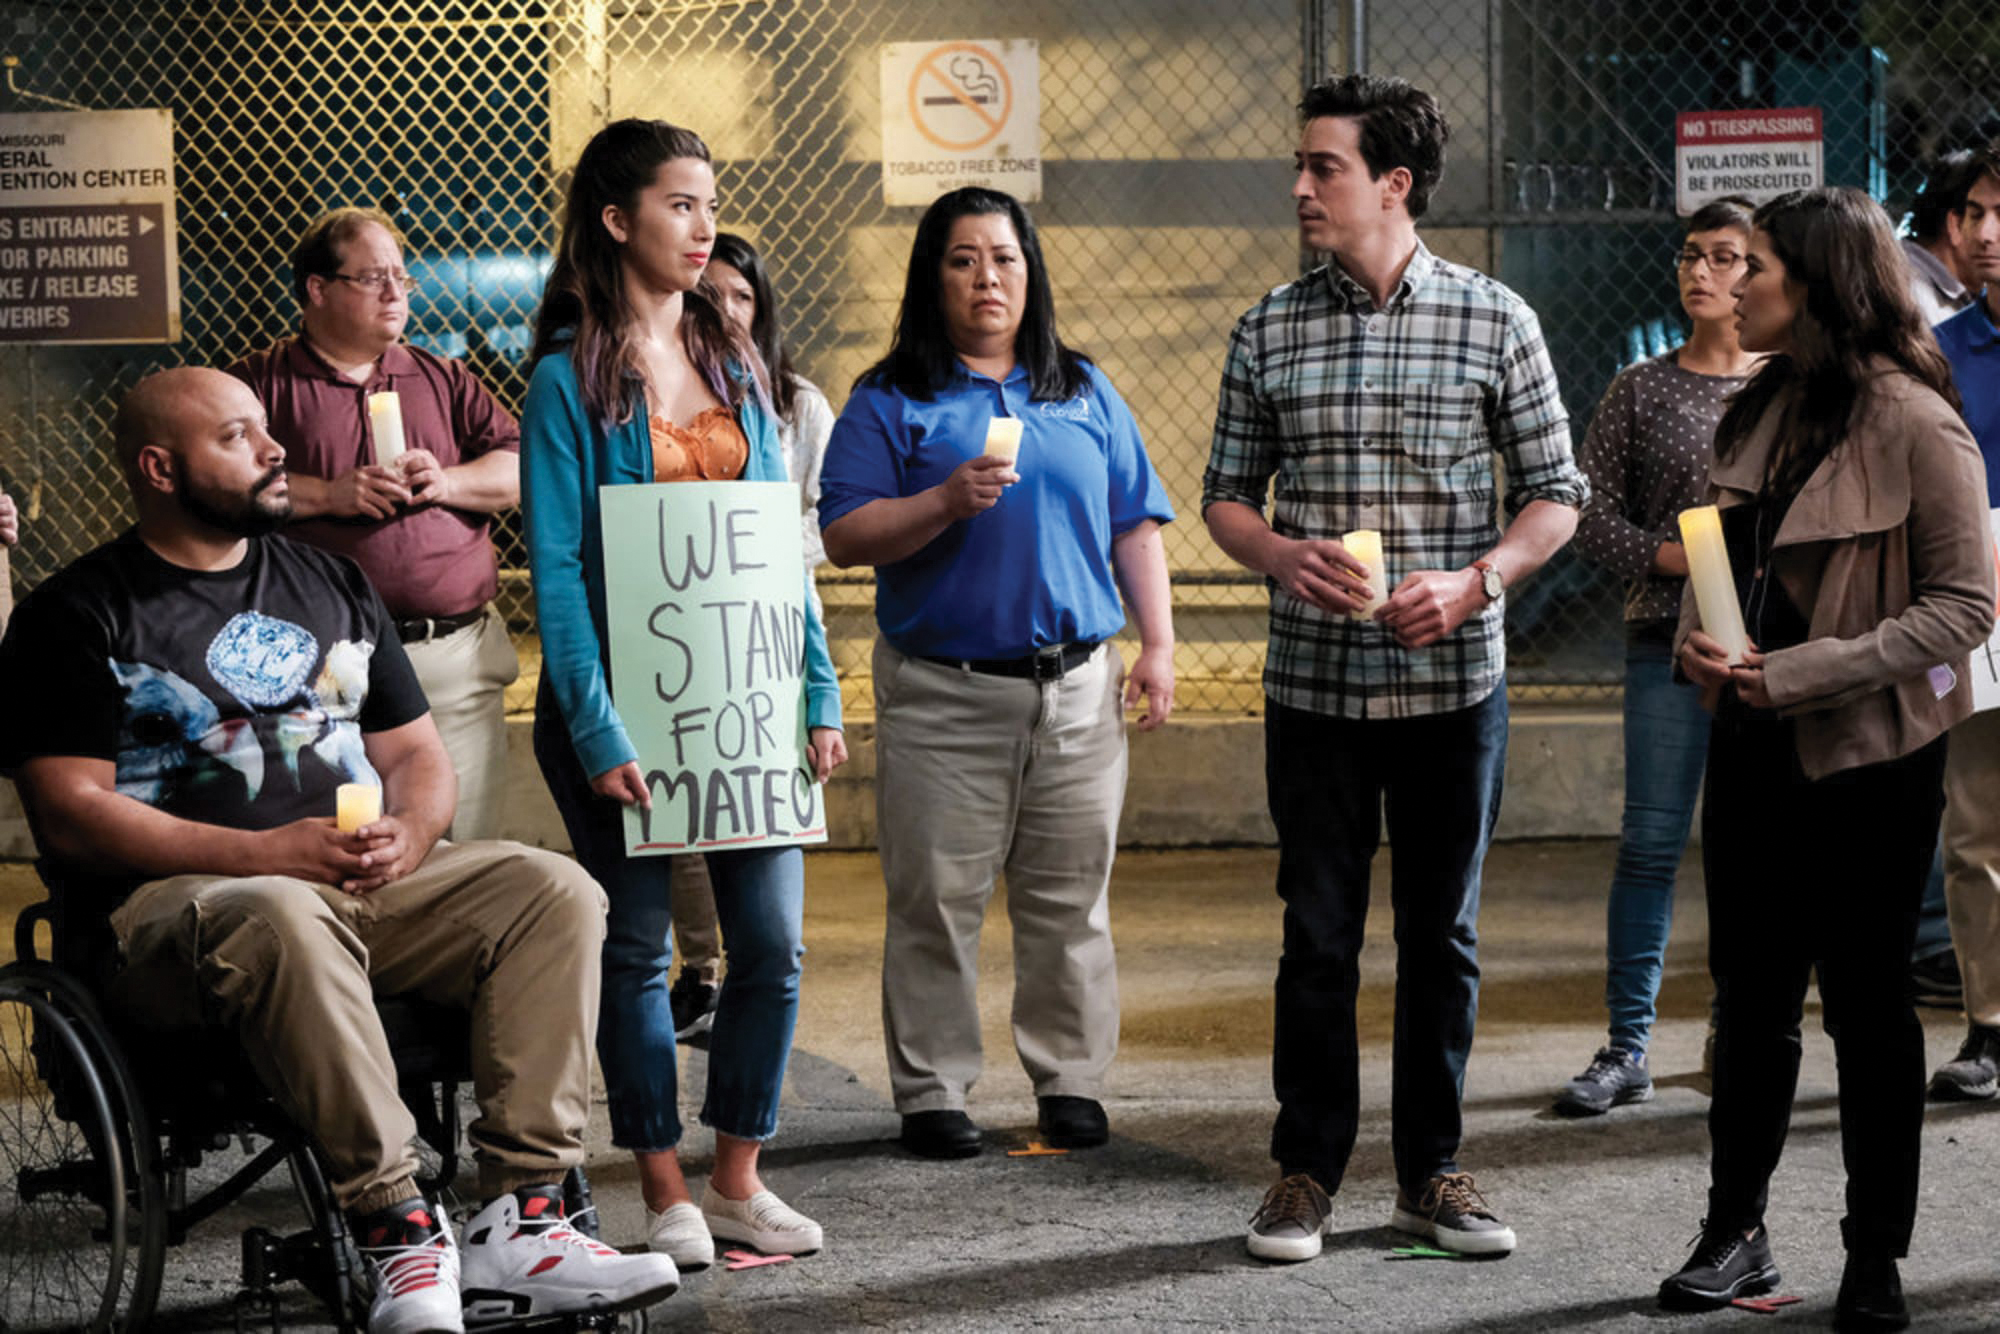 Image of a protest from NBC's Superstore TV show.